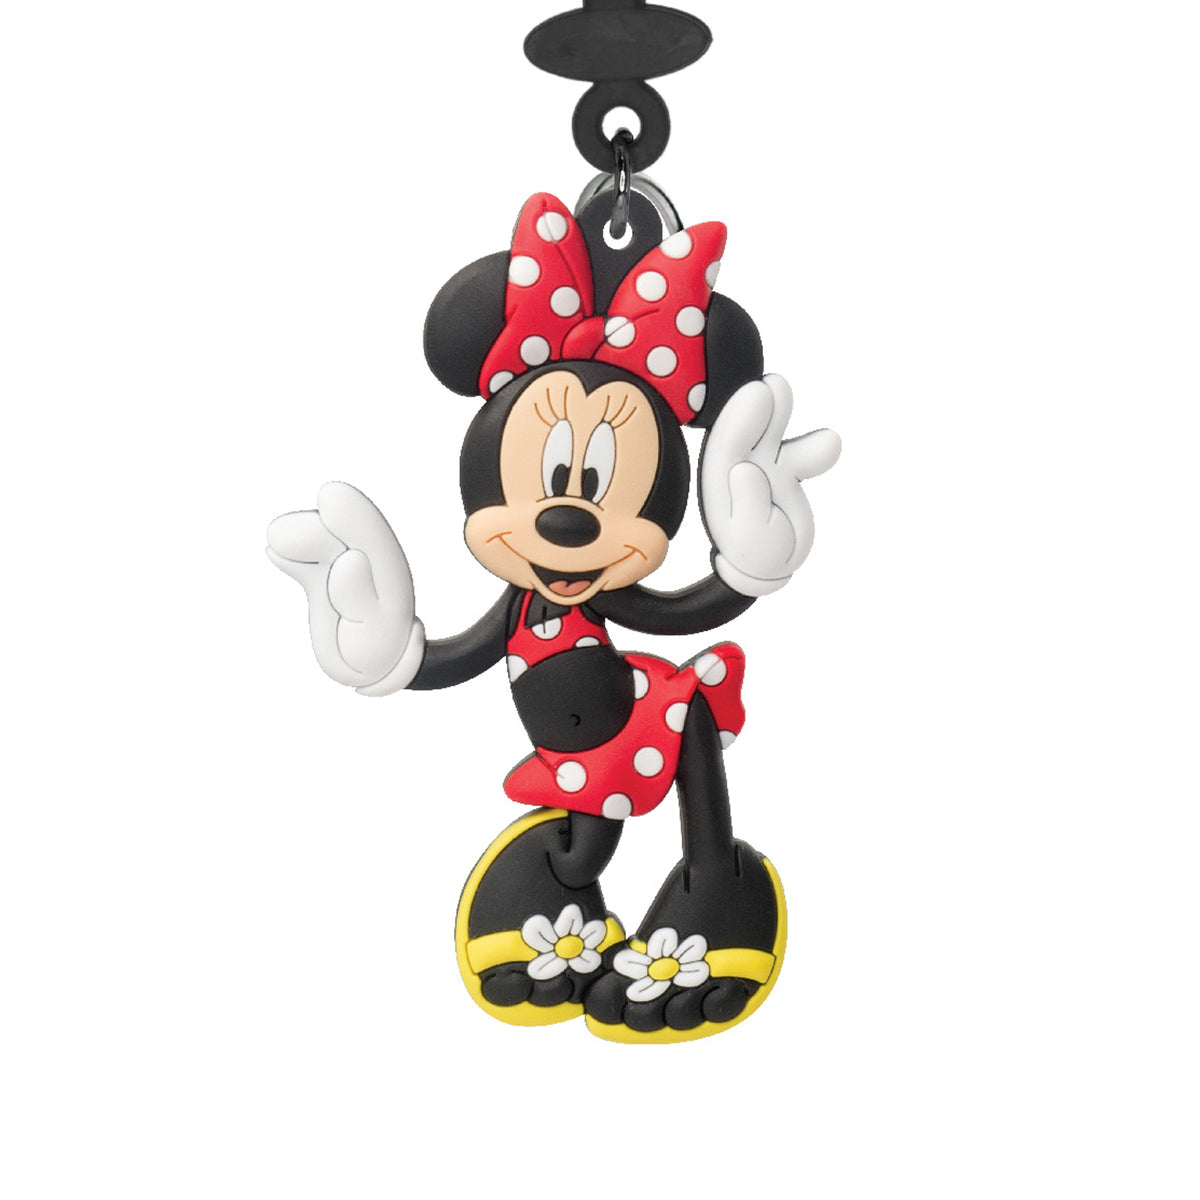 Disney Minnie Mouse Fun in the Sun Collectible Soft Touch Bag Clip/Luggage Charm